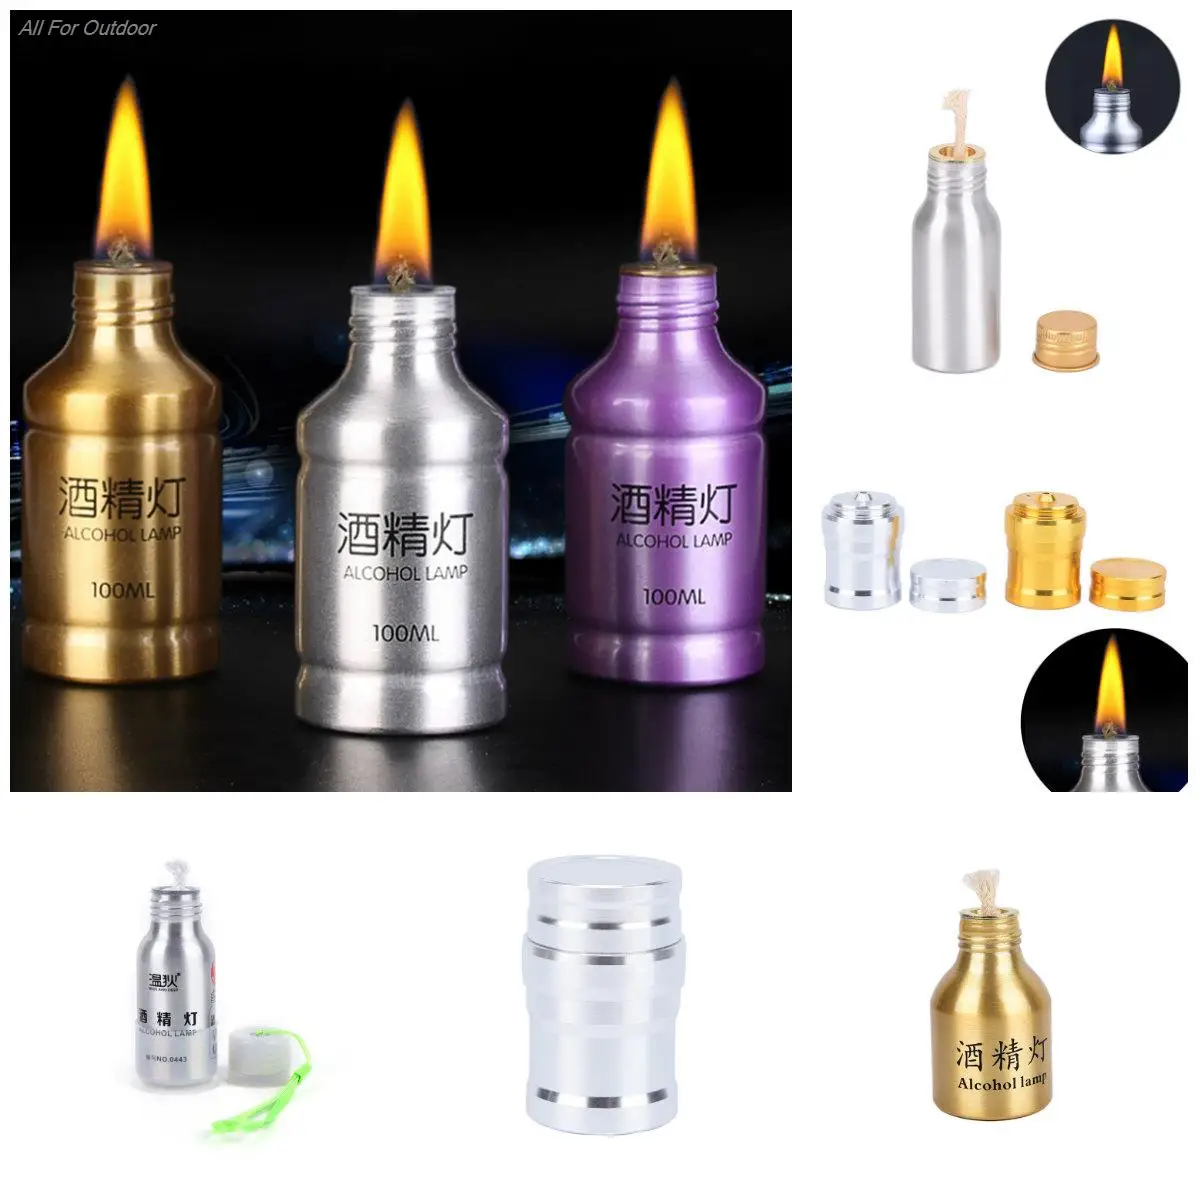 Metal Alcohol Lamp Portable Liquid Stoves For Outdoor Survival Camping Hiking Travel Without Alcohol